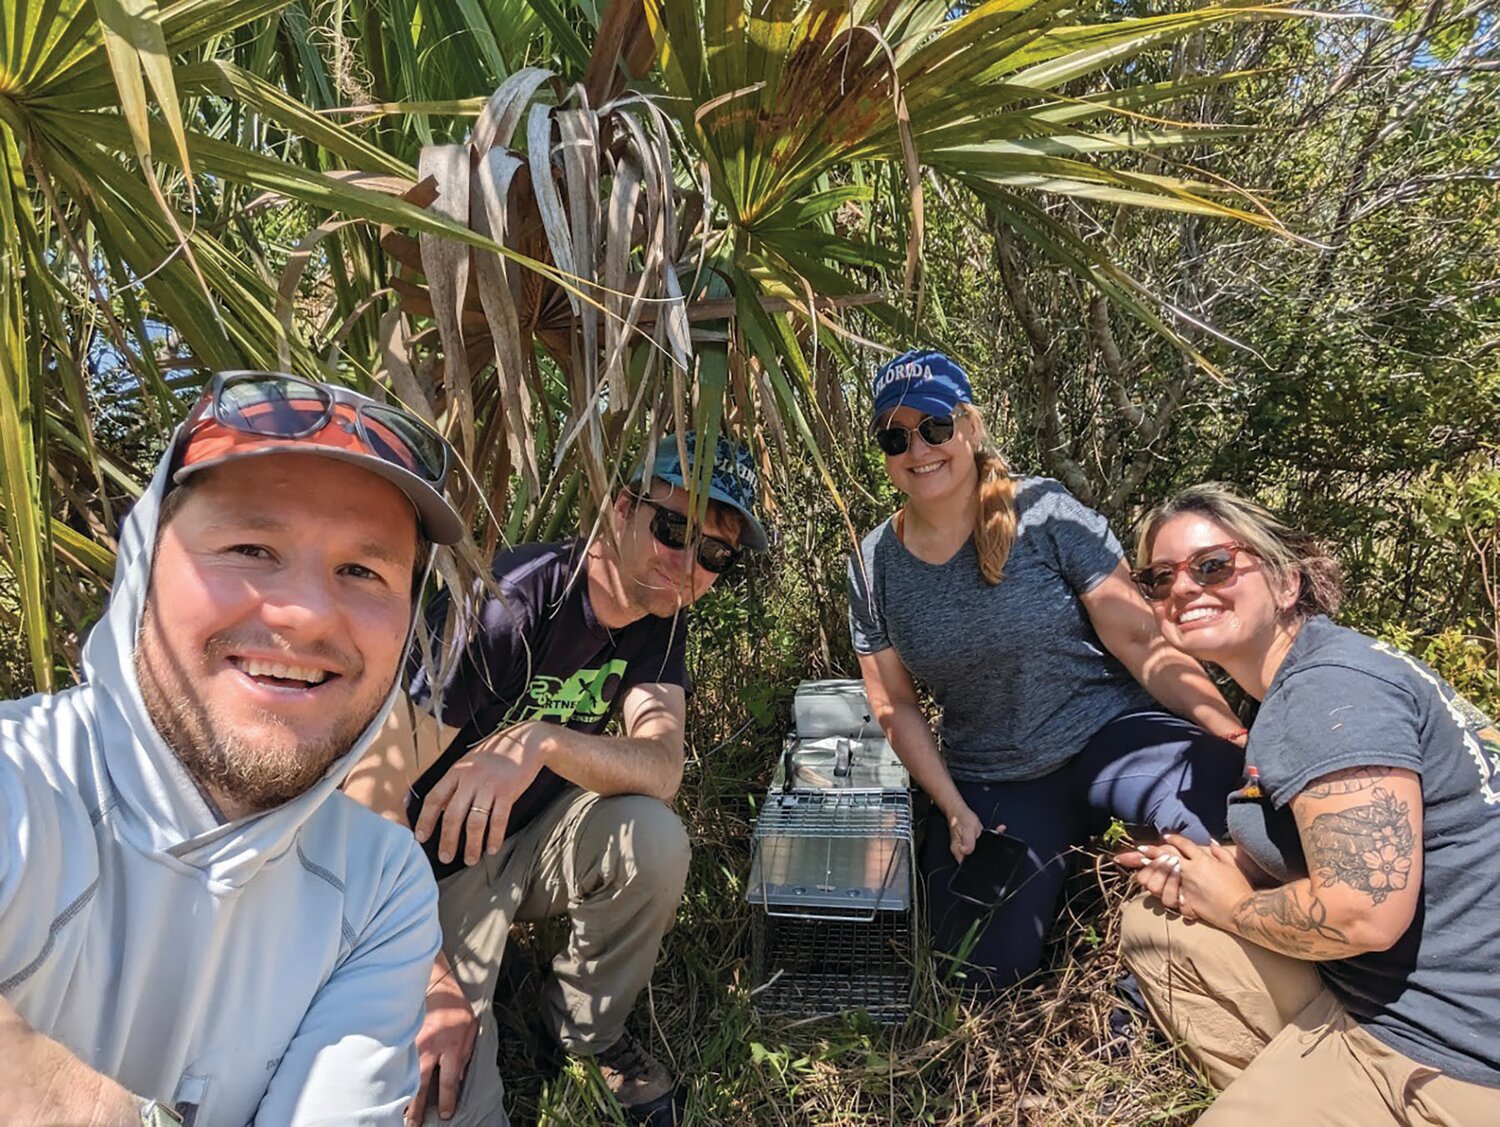 Tegu team with designers: From left to right, Ben Stookey and Derek Yorks, developers of the AI smart traps, Melissa Miller, lead UF/IFAS researcher and Jenna Cole pause after field deployment of the first Ai smart trap for capture of invasive Argentine black and white tegus. [Photo courtesy UF/IFAS]